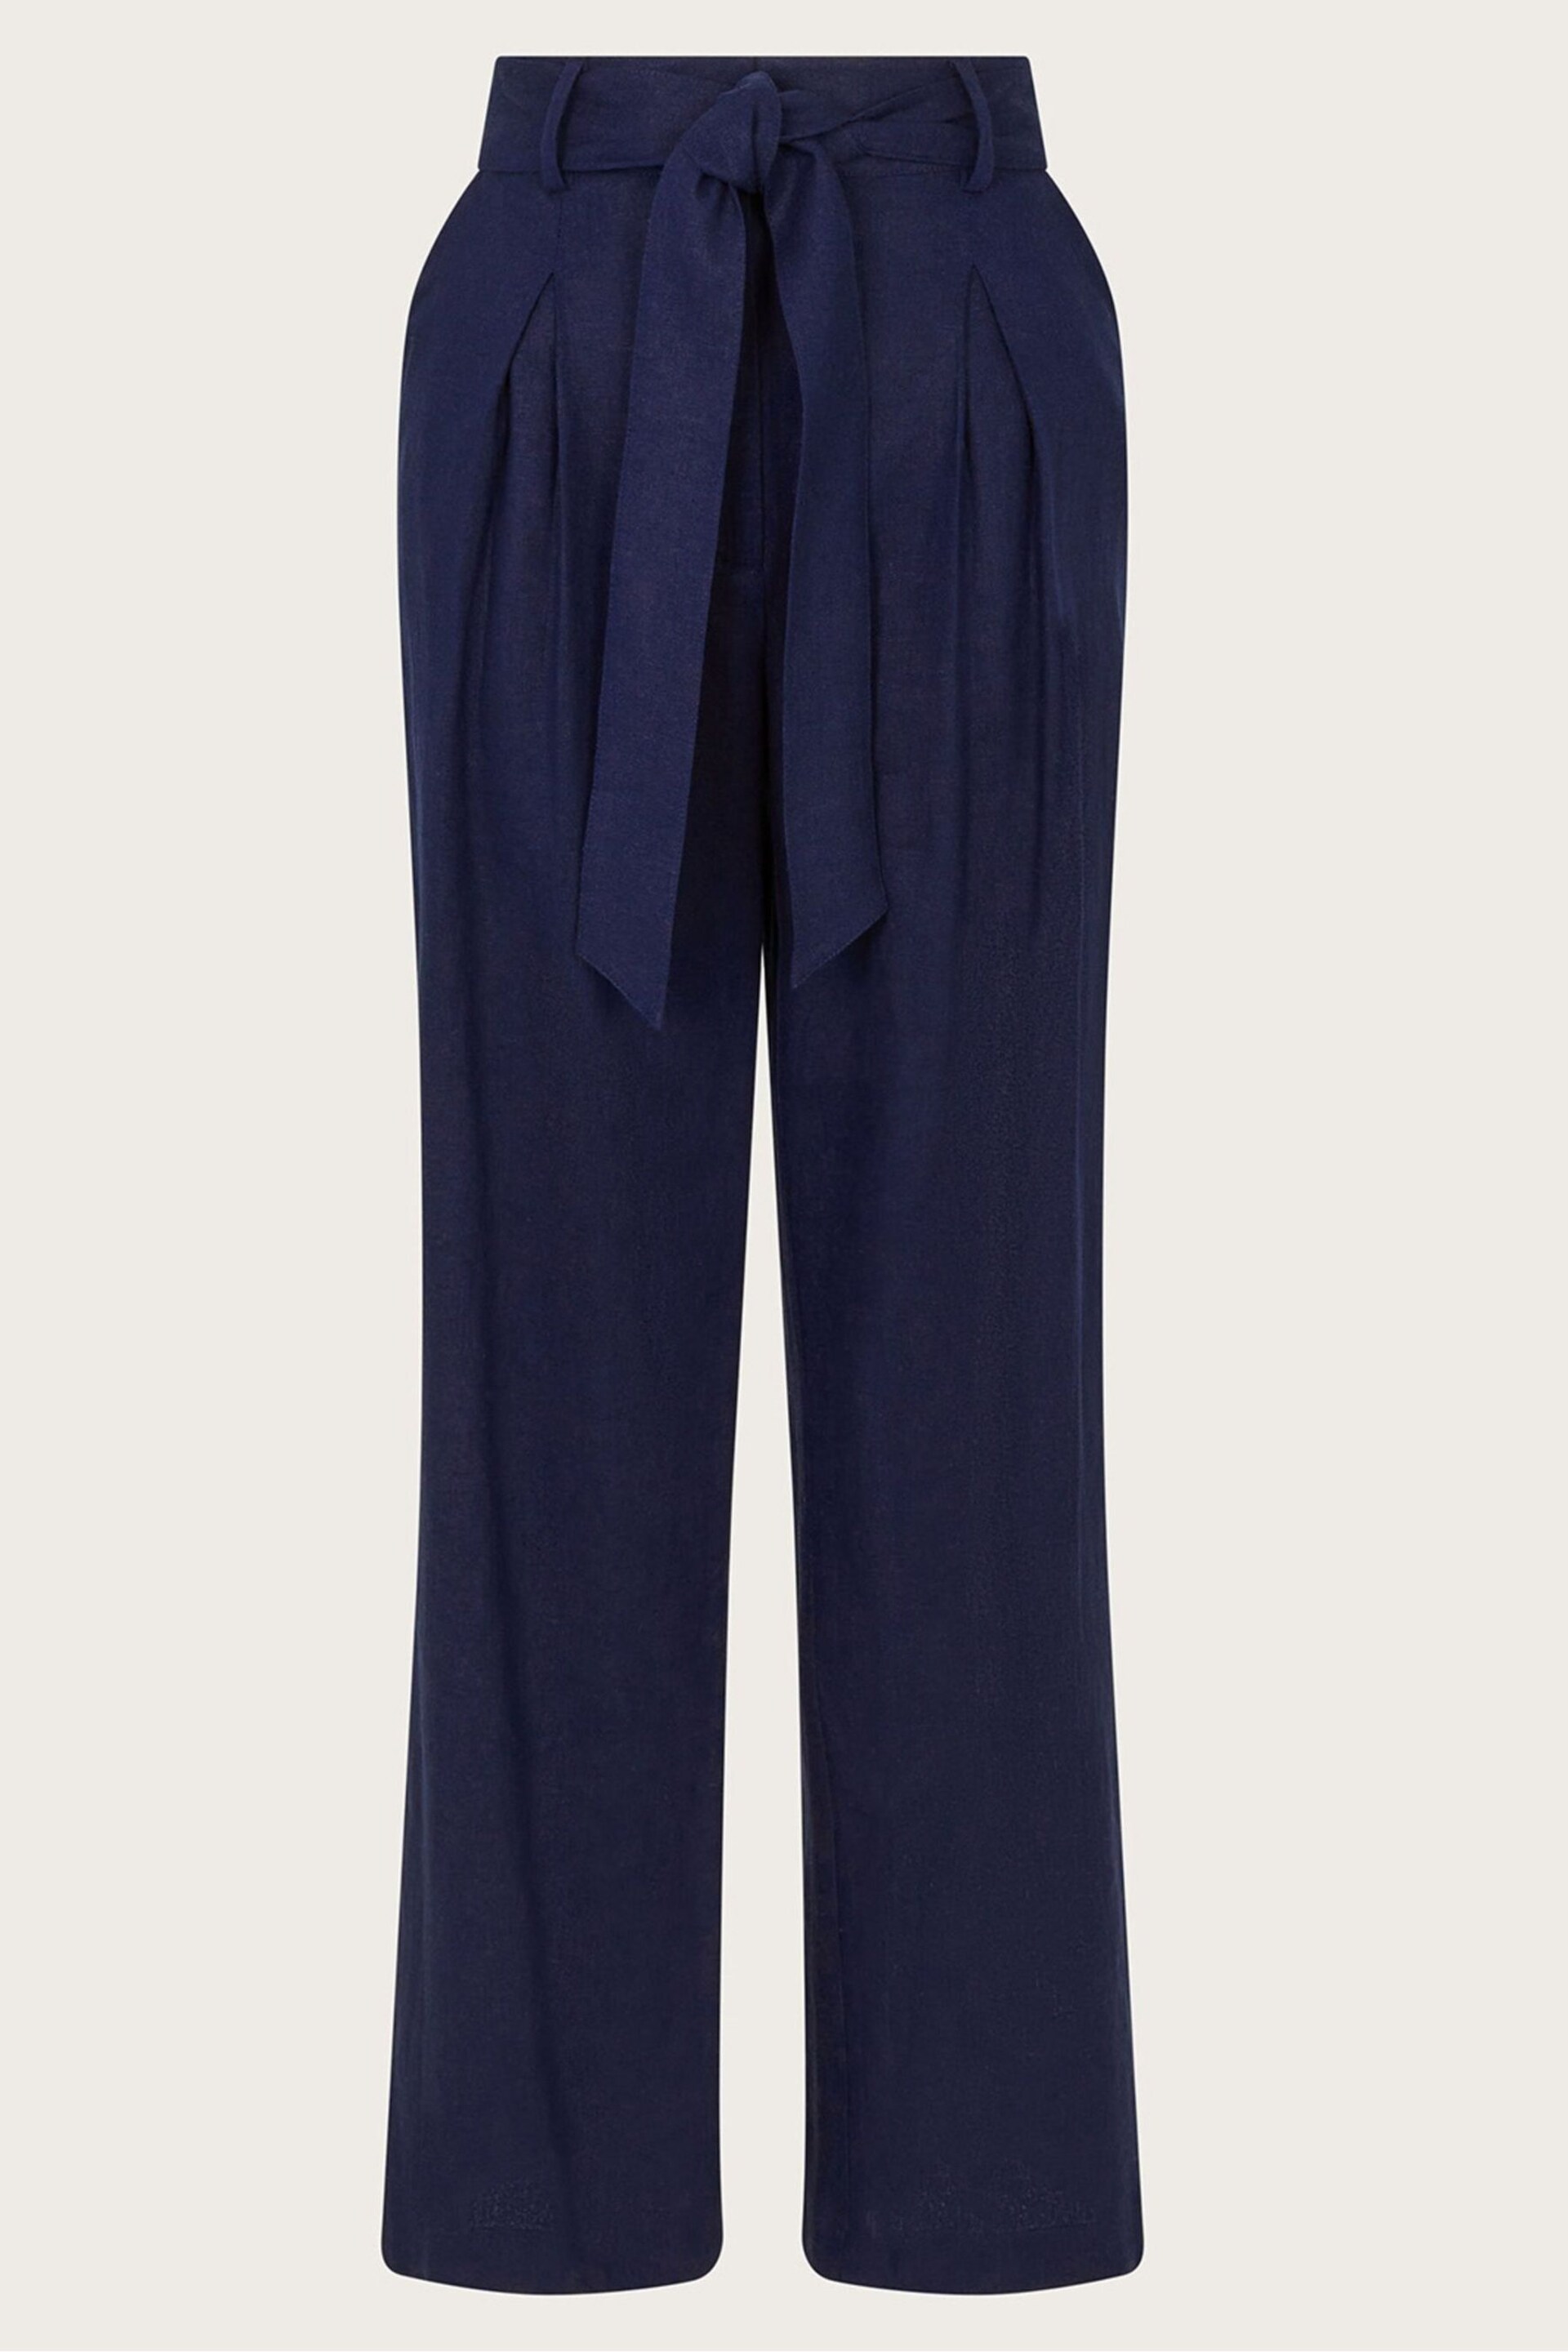 Monsoon Blue Mabel Short Length Tie Trousers - Image 5 of 5